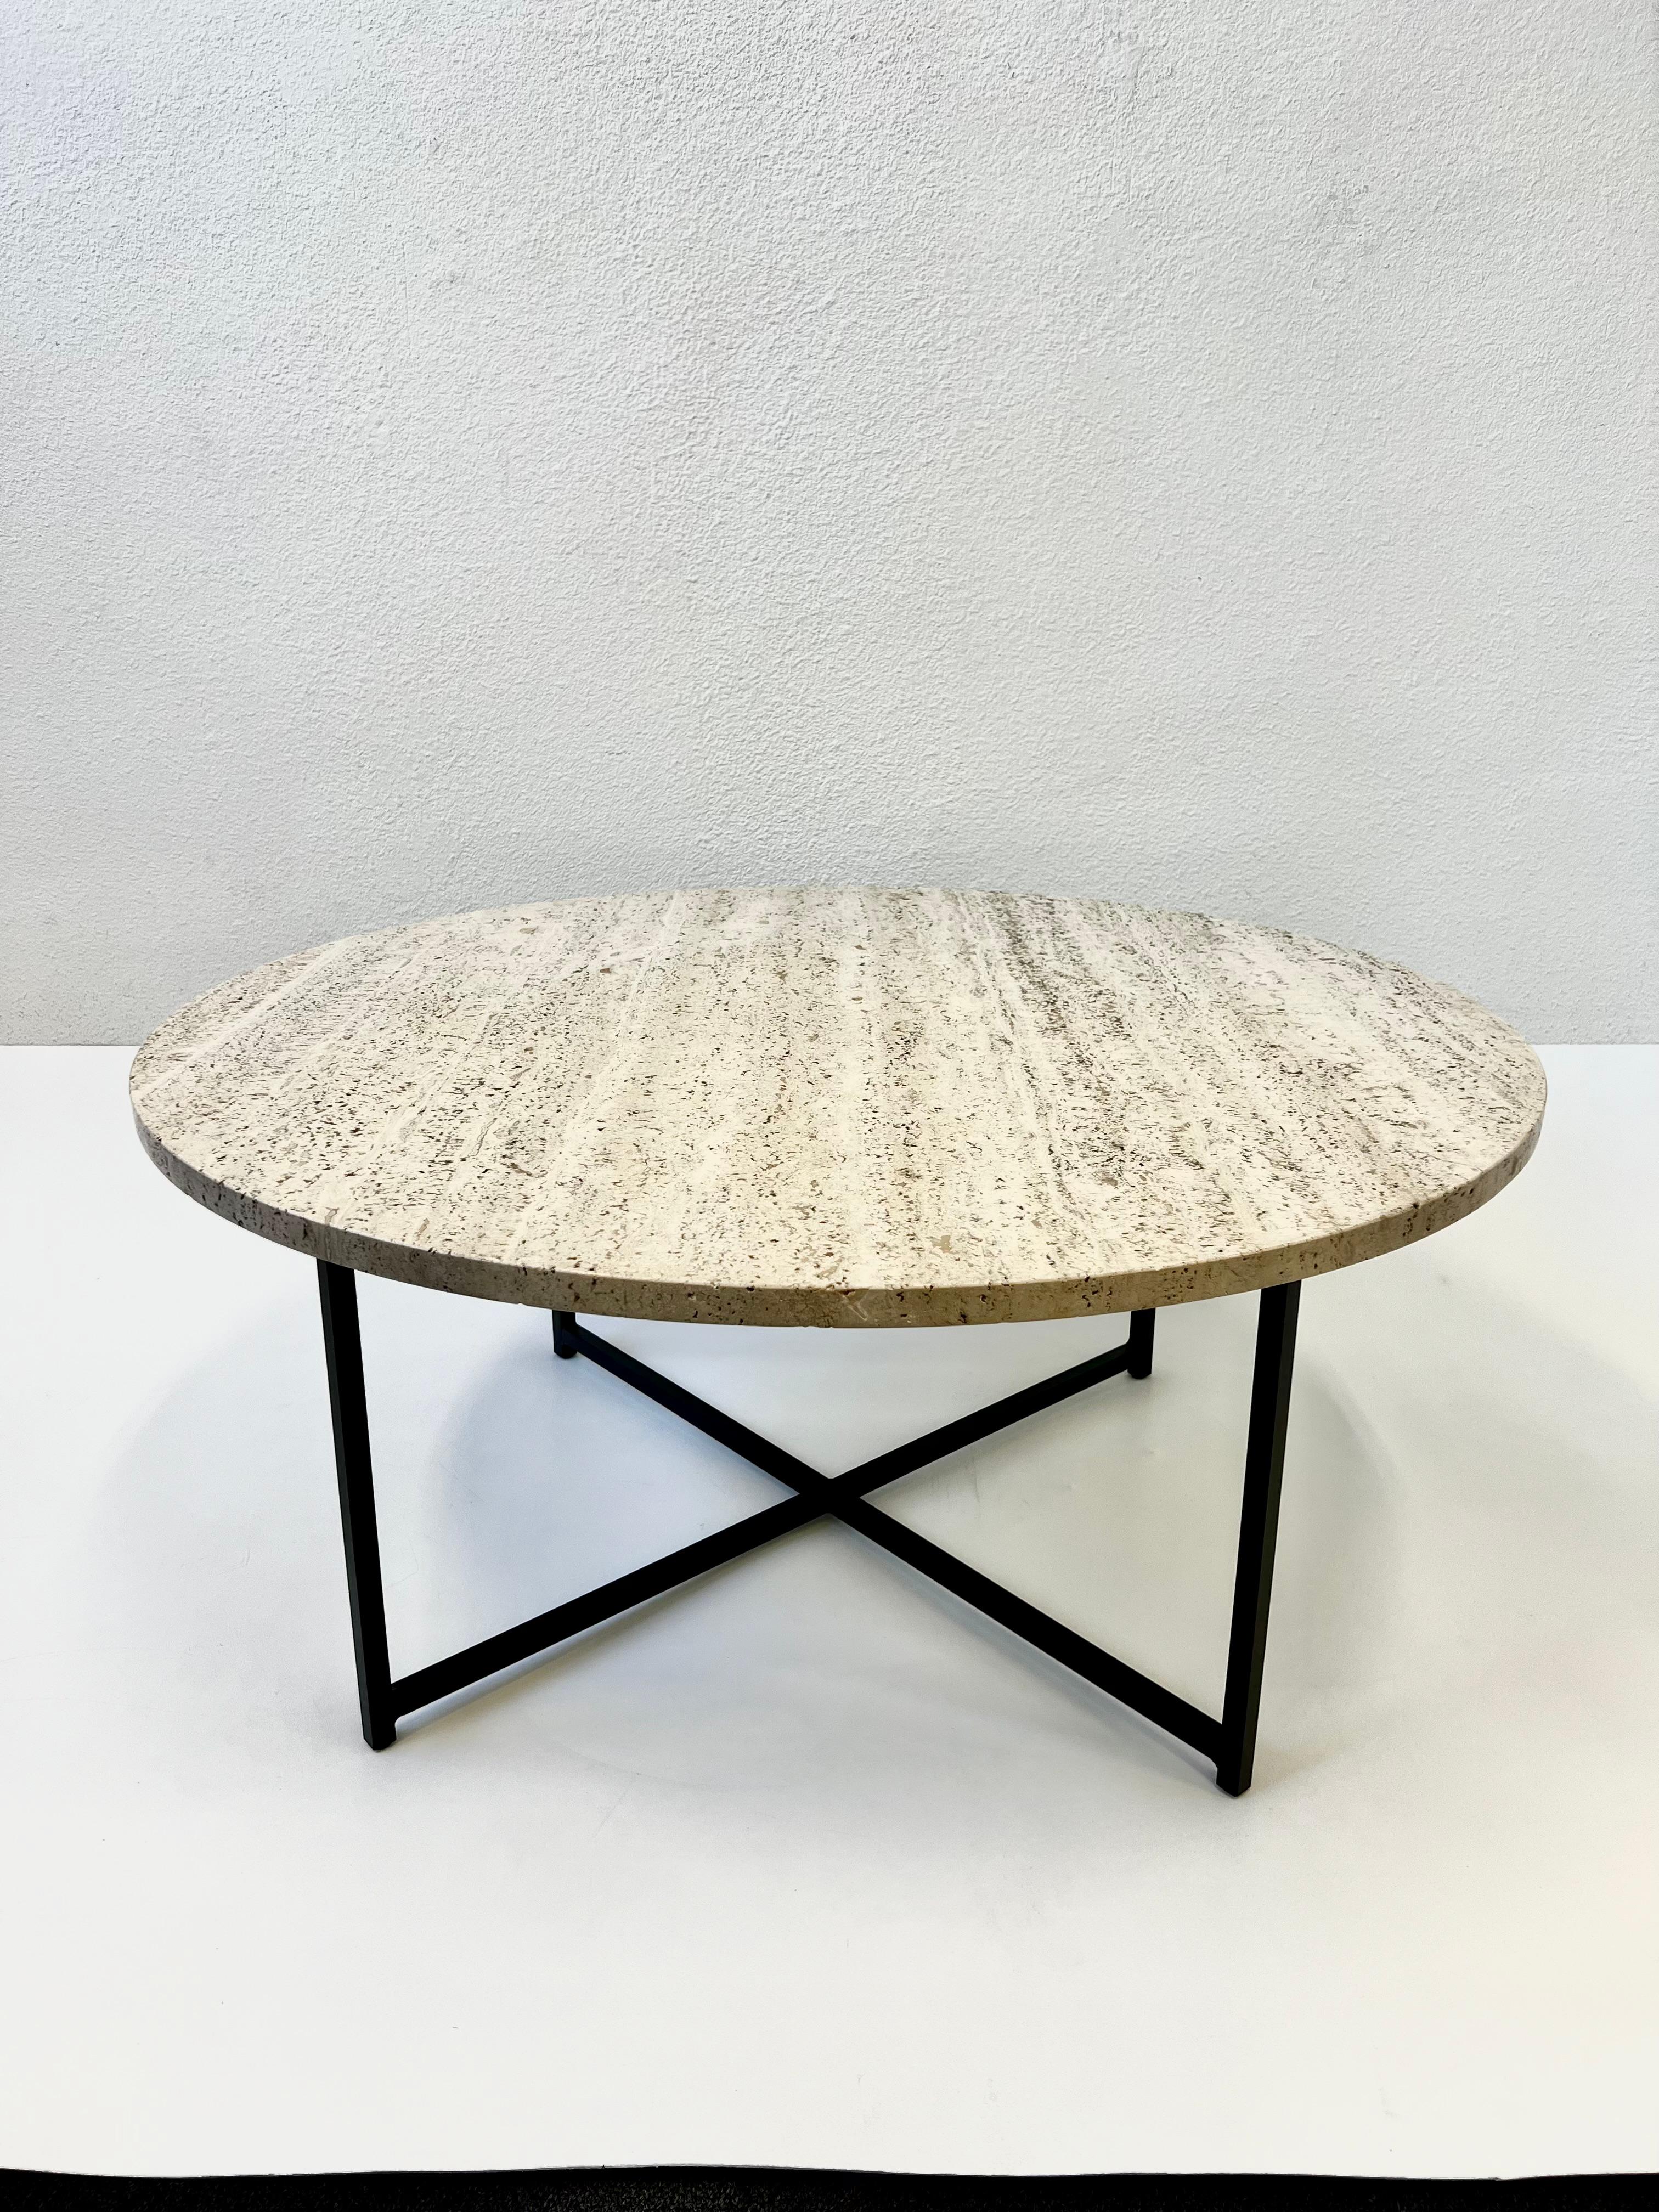 Round Italian Travertine and Bronze Cocktail Table  For Sale 2